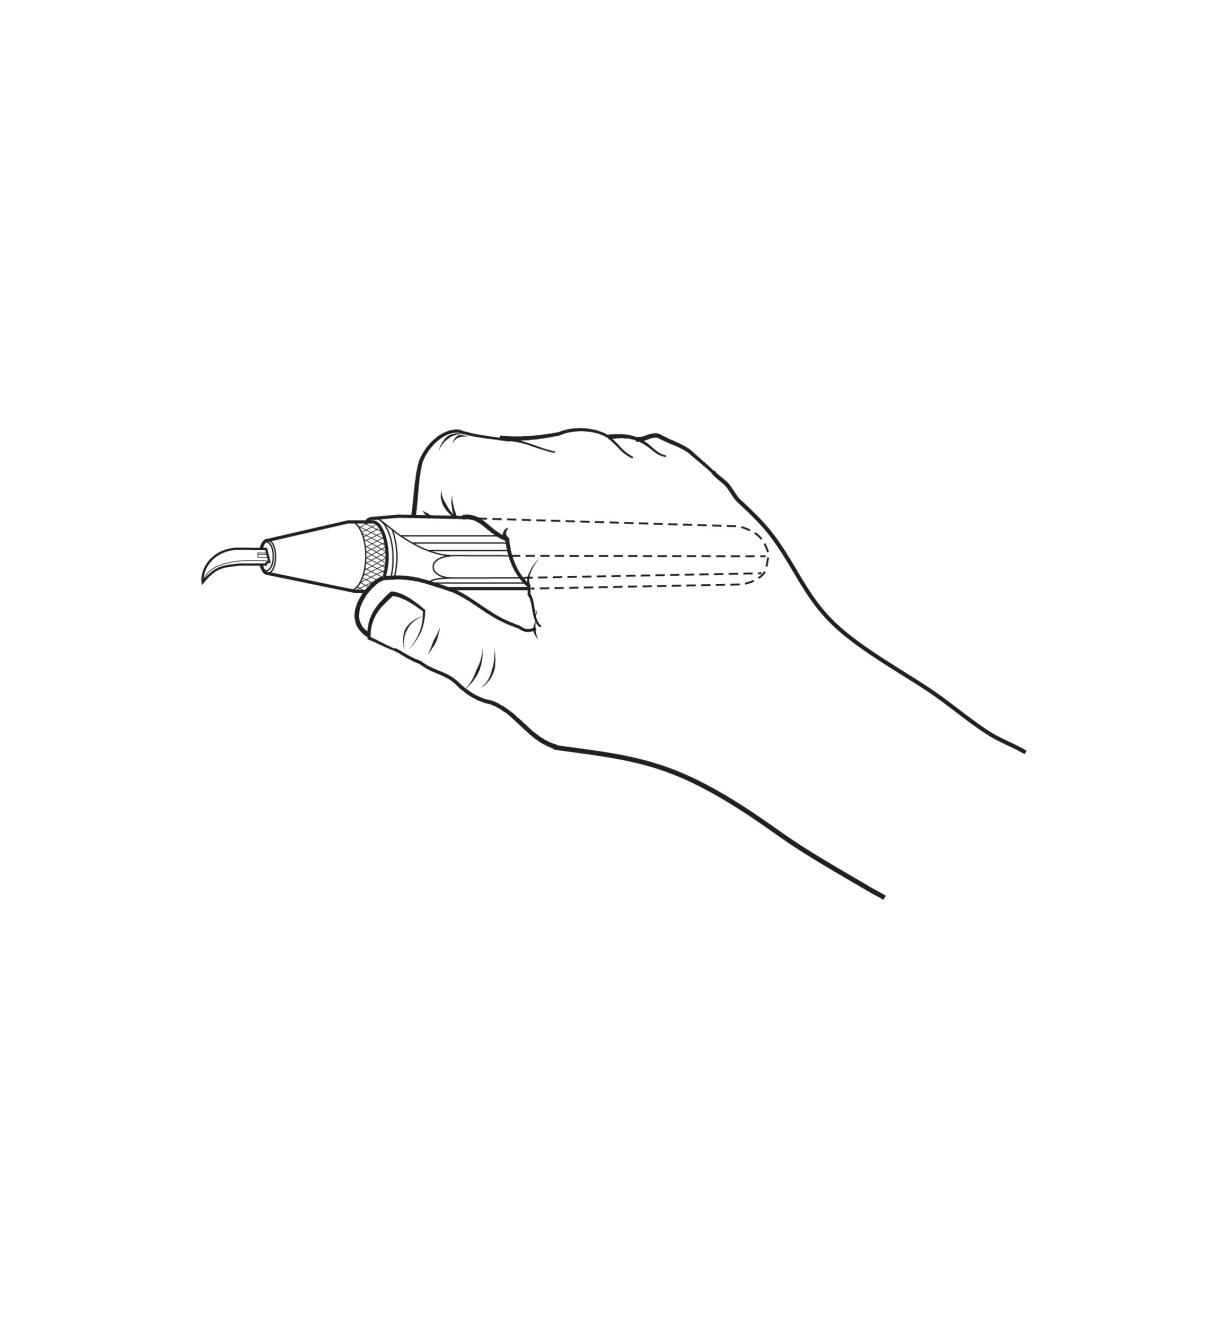 Ghosted illustration of carver's knife held in a hand